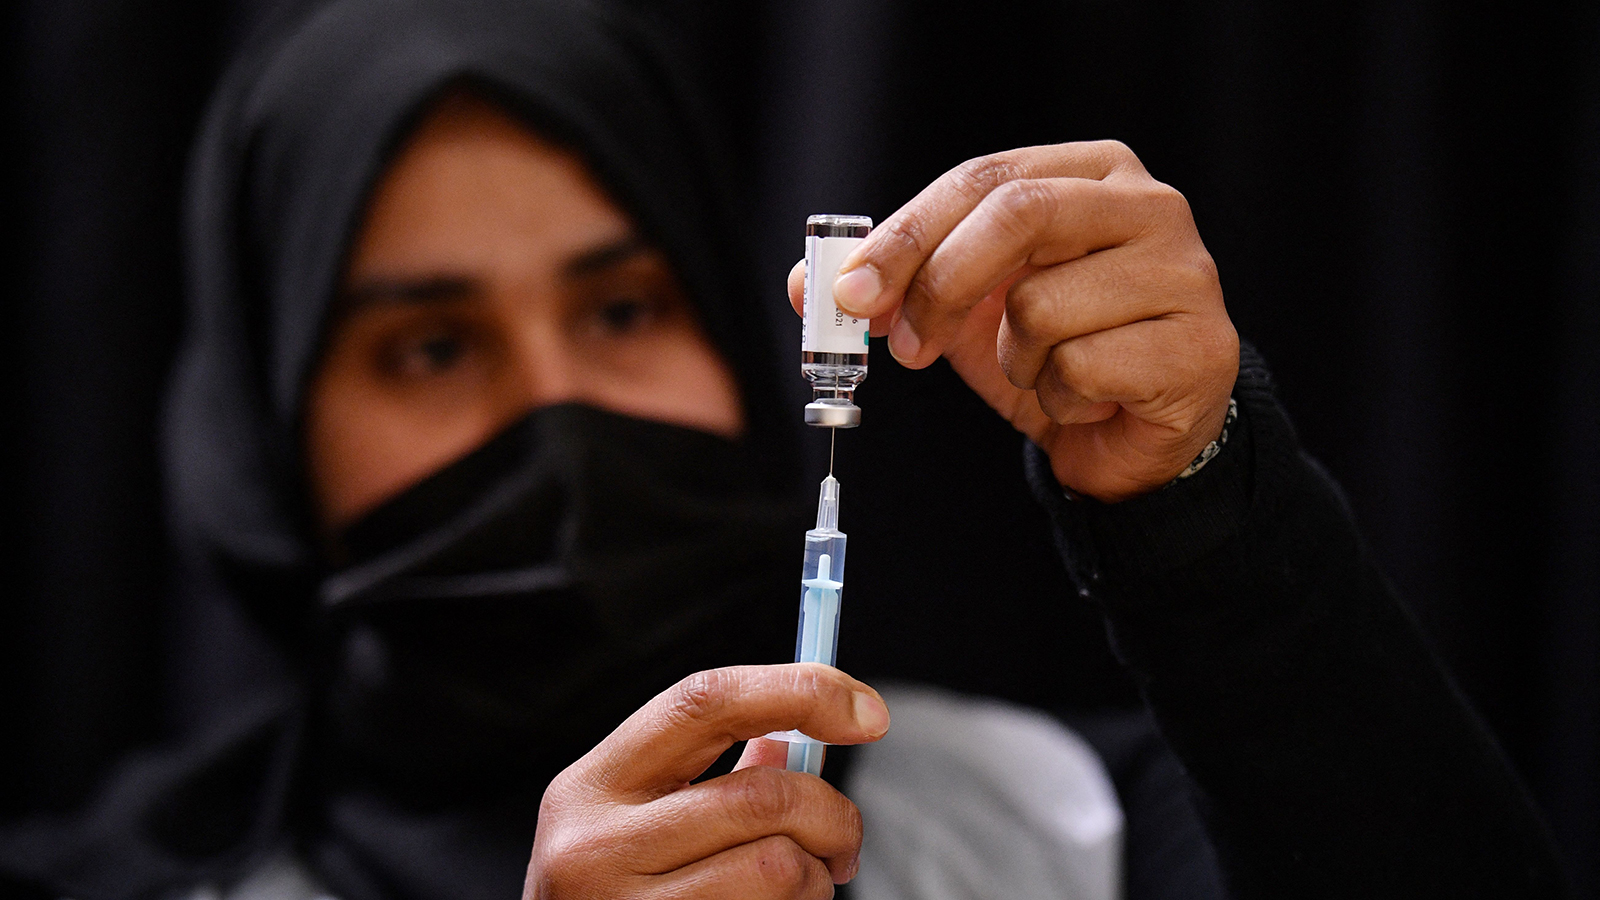 A health worker prepares an injection of the AstraZeneca Covid-19 vaccine at a temporary vaccination cener set up at the East London Mosque in London on April 14.